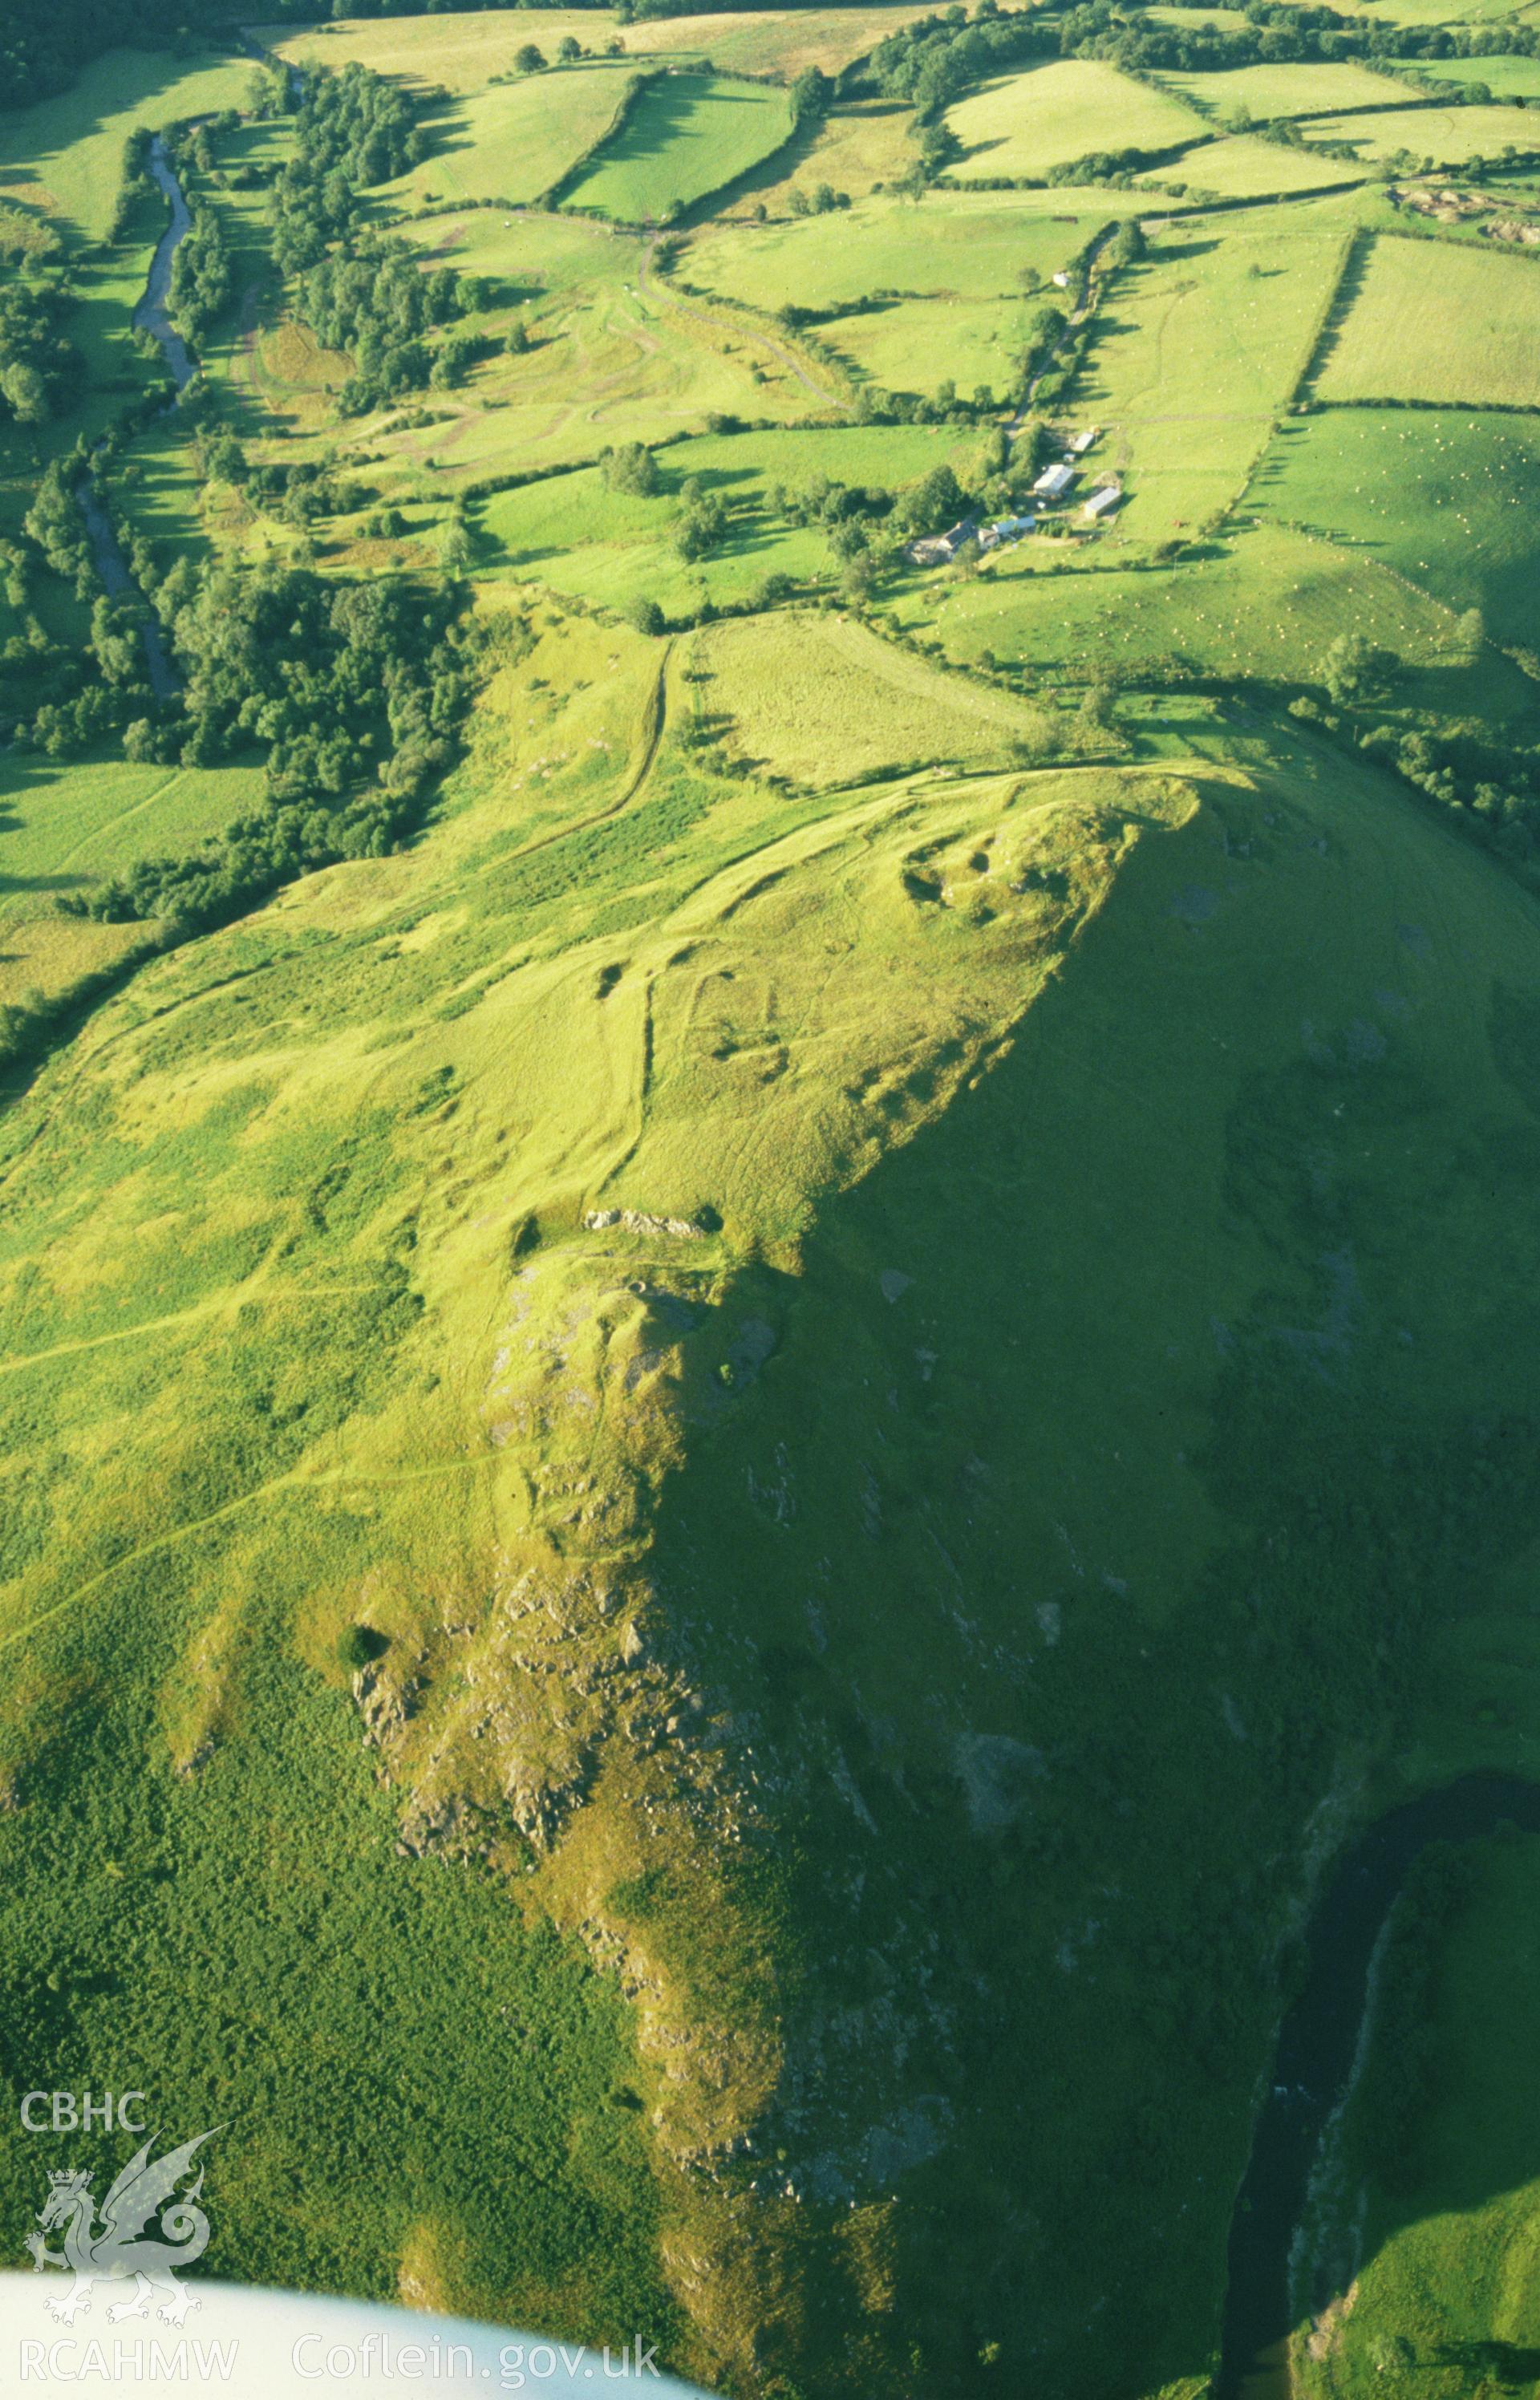 RCAHMW colour slide oblique aerial photograph of Cefnllys Castle, Penybont, taken by CR Musson on 02/08/88